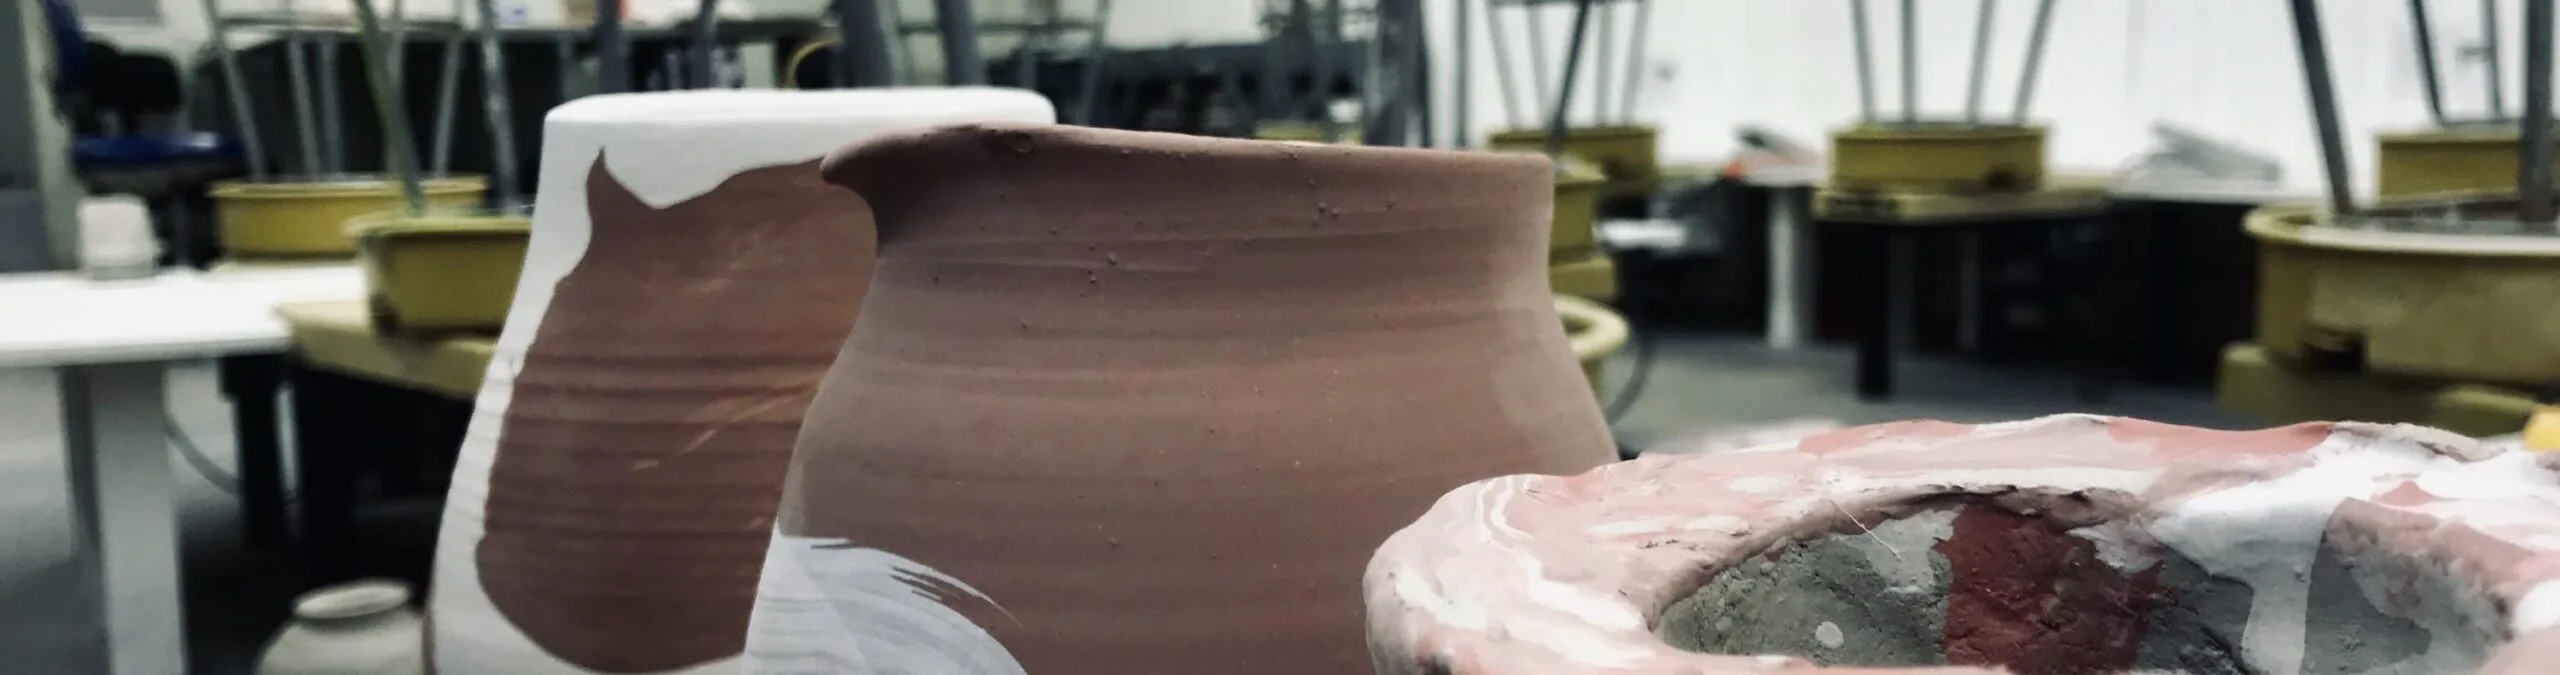 Large vases in the pottery studio